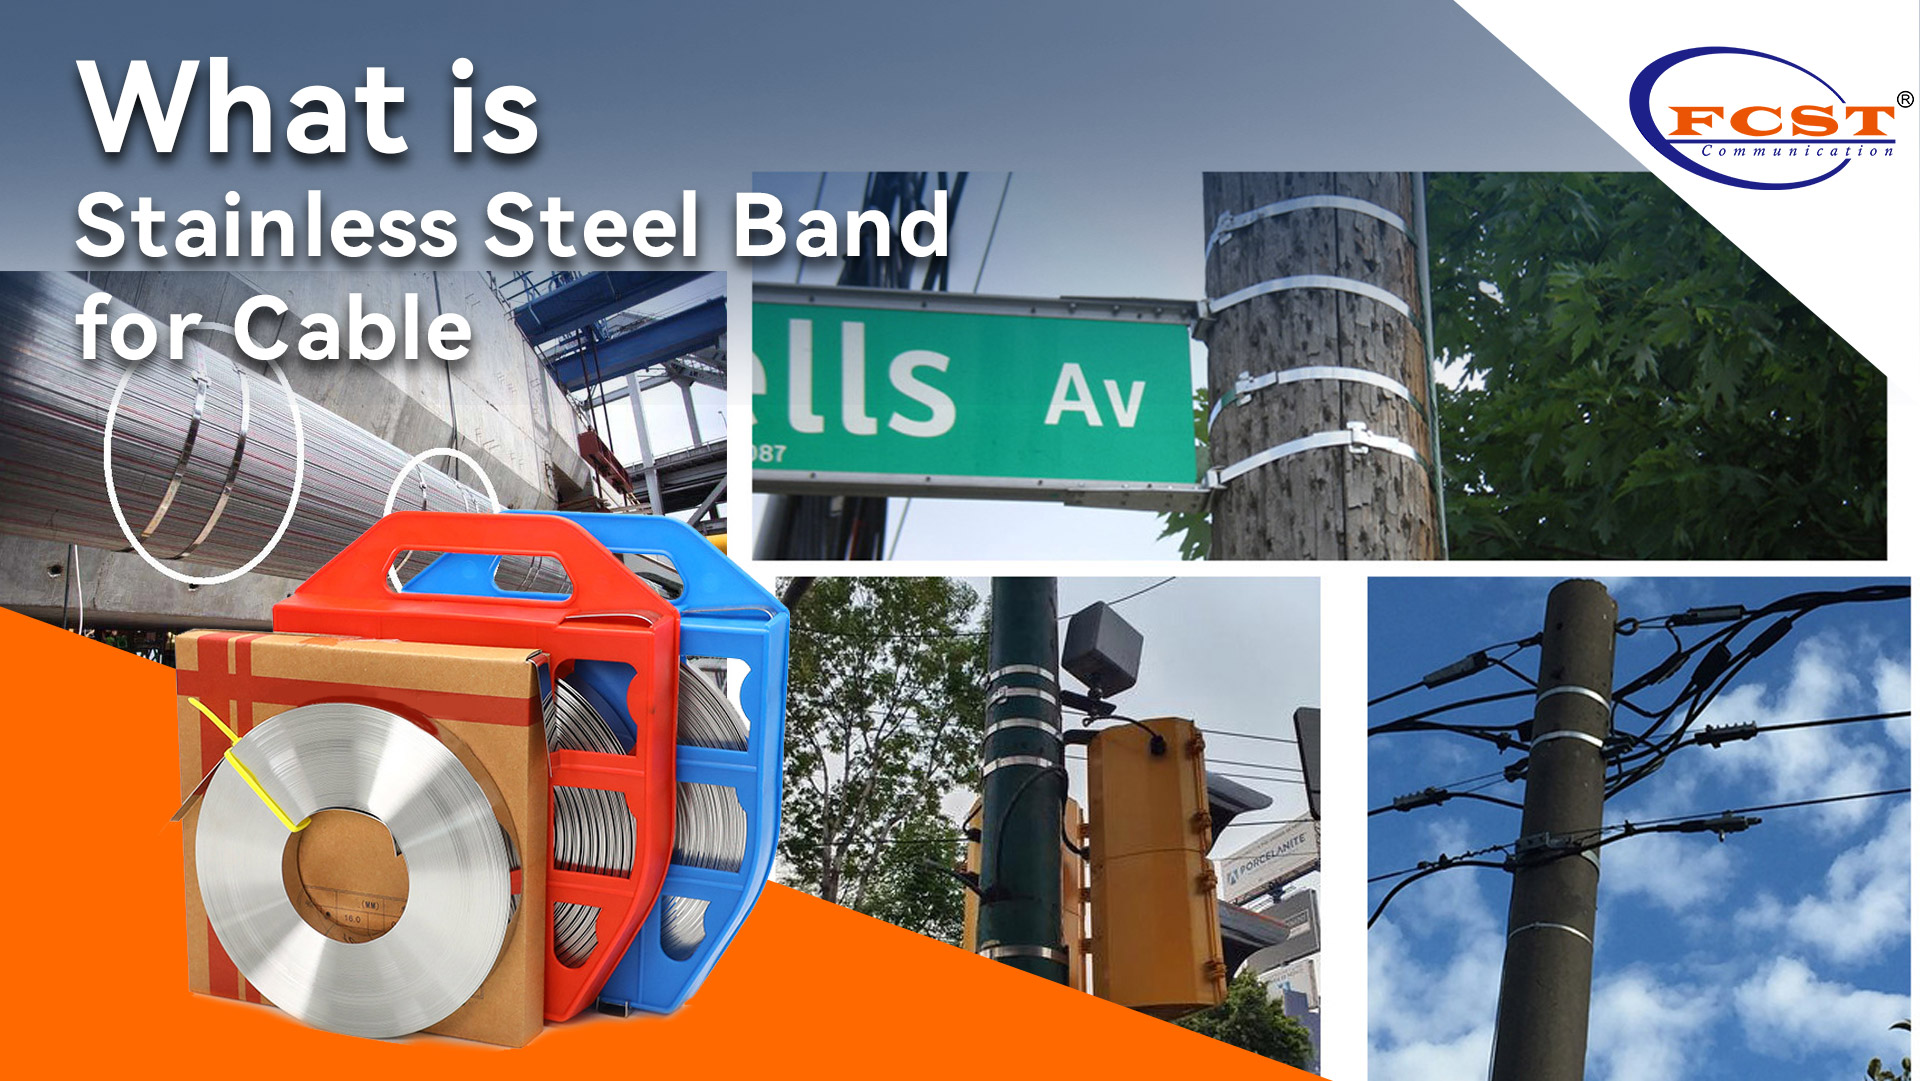 What is Stainless Steel Band for Cable?